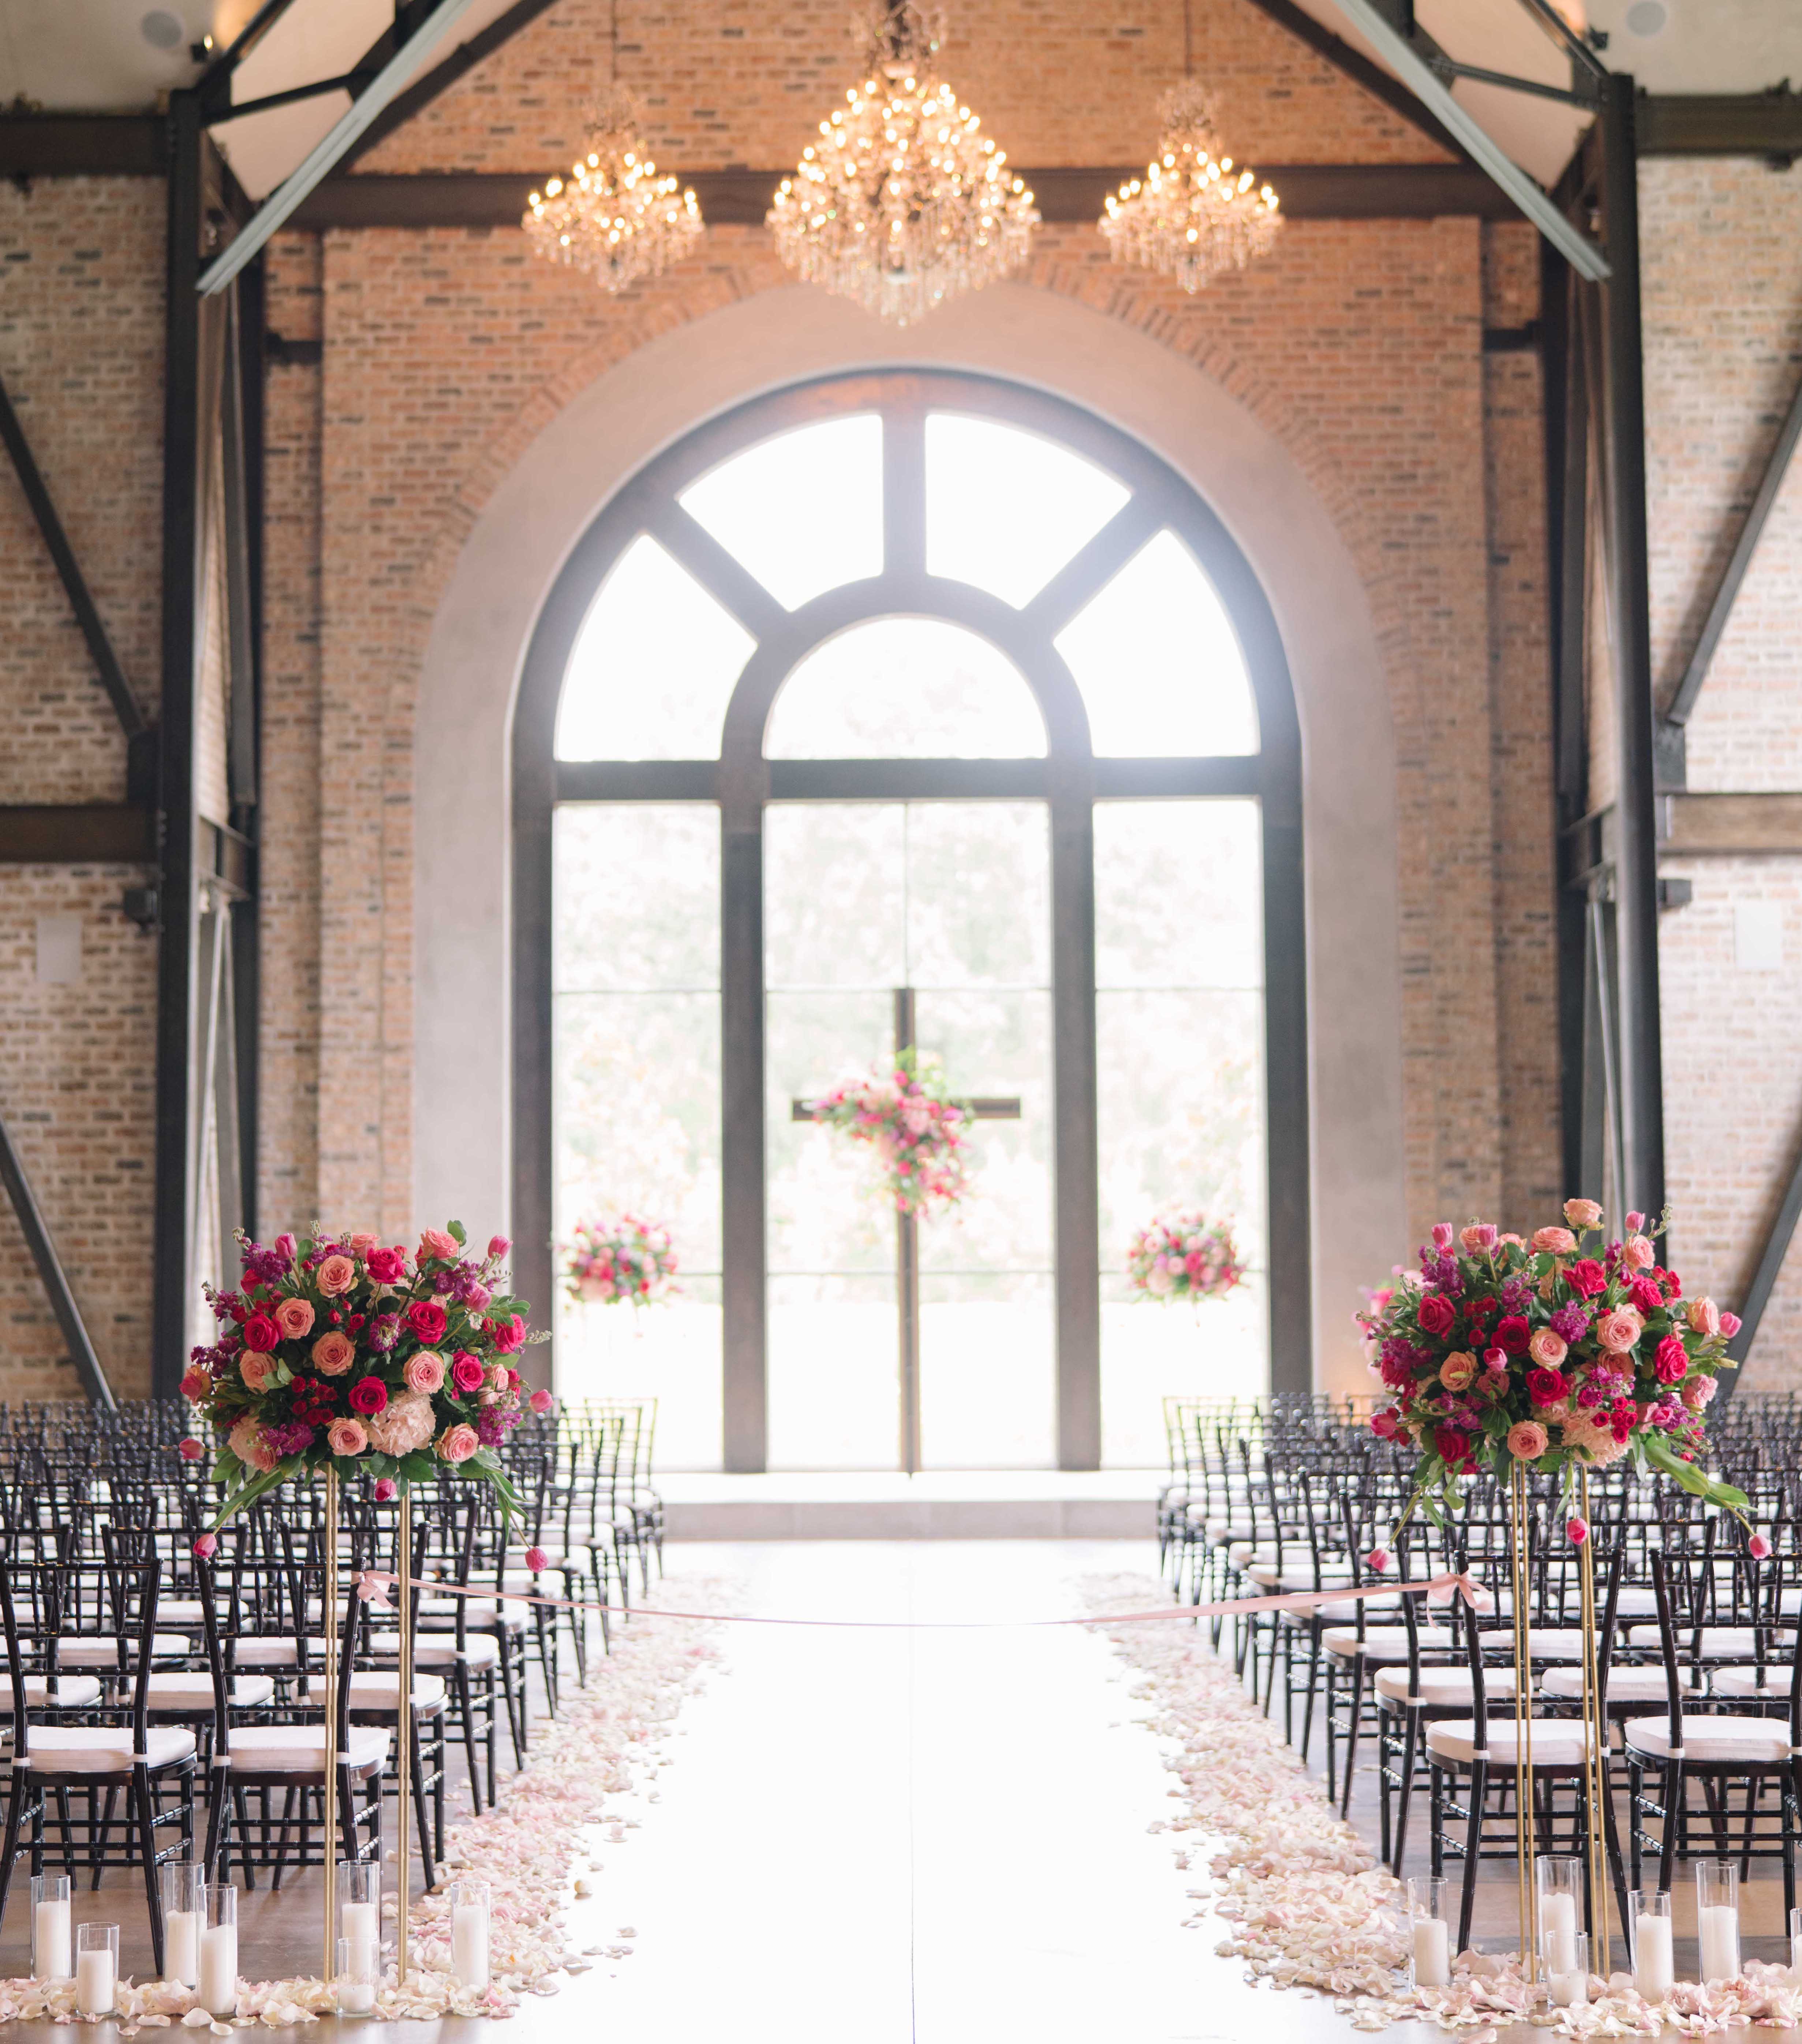 A wedding ceremony is set up with bright pink decor in Conroe, TX.